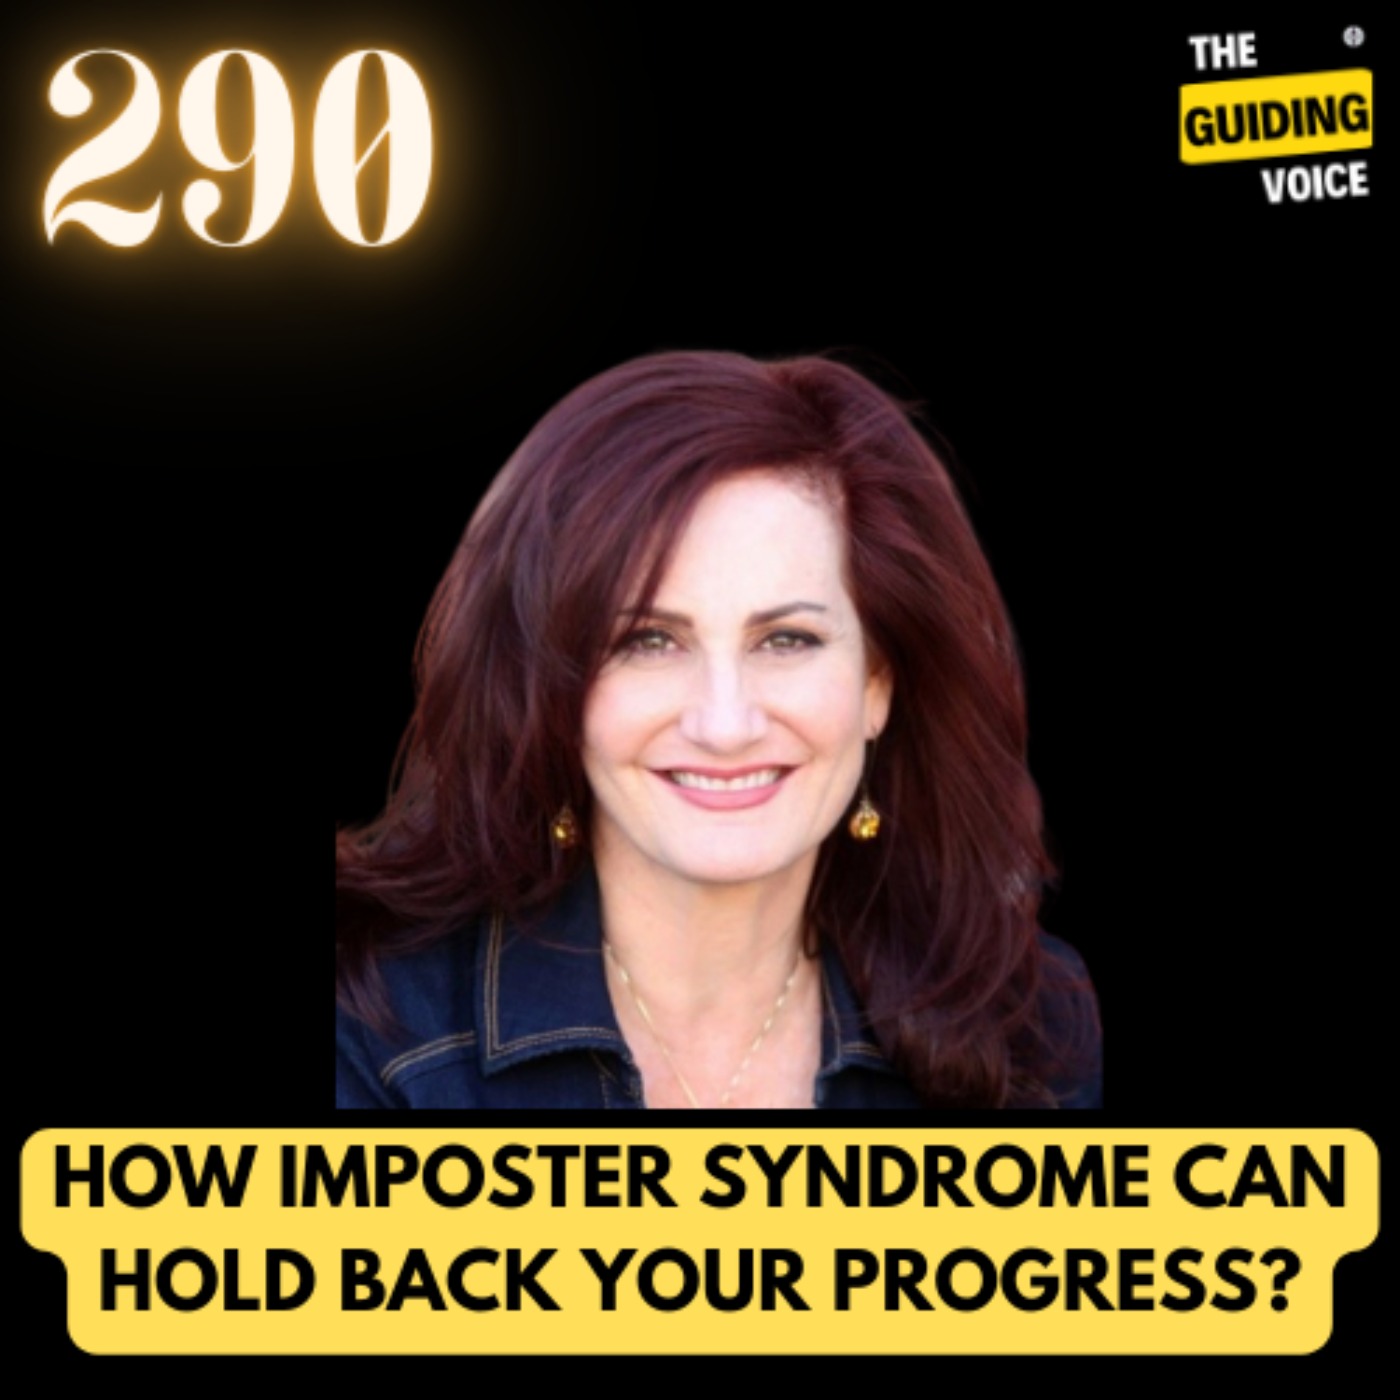 Dealing with imposter syndrome | Michele Molitor | #TGV290